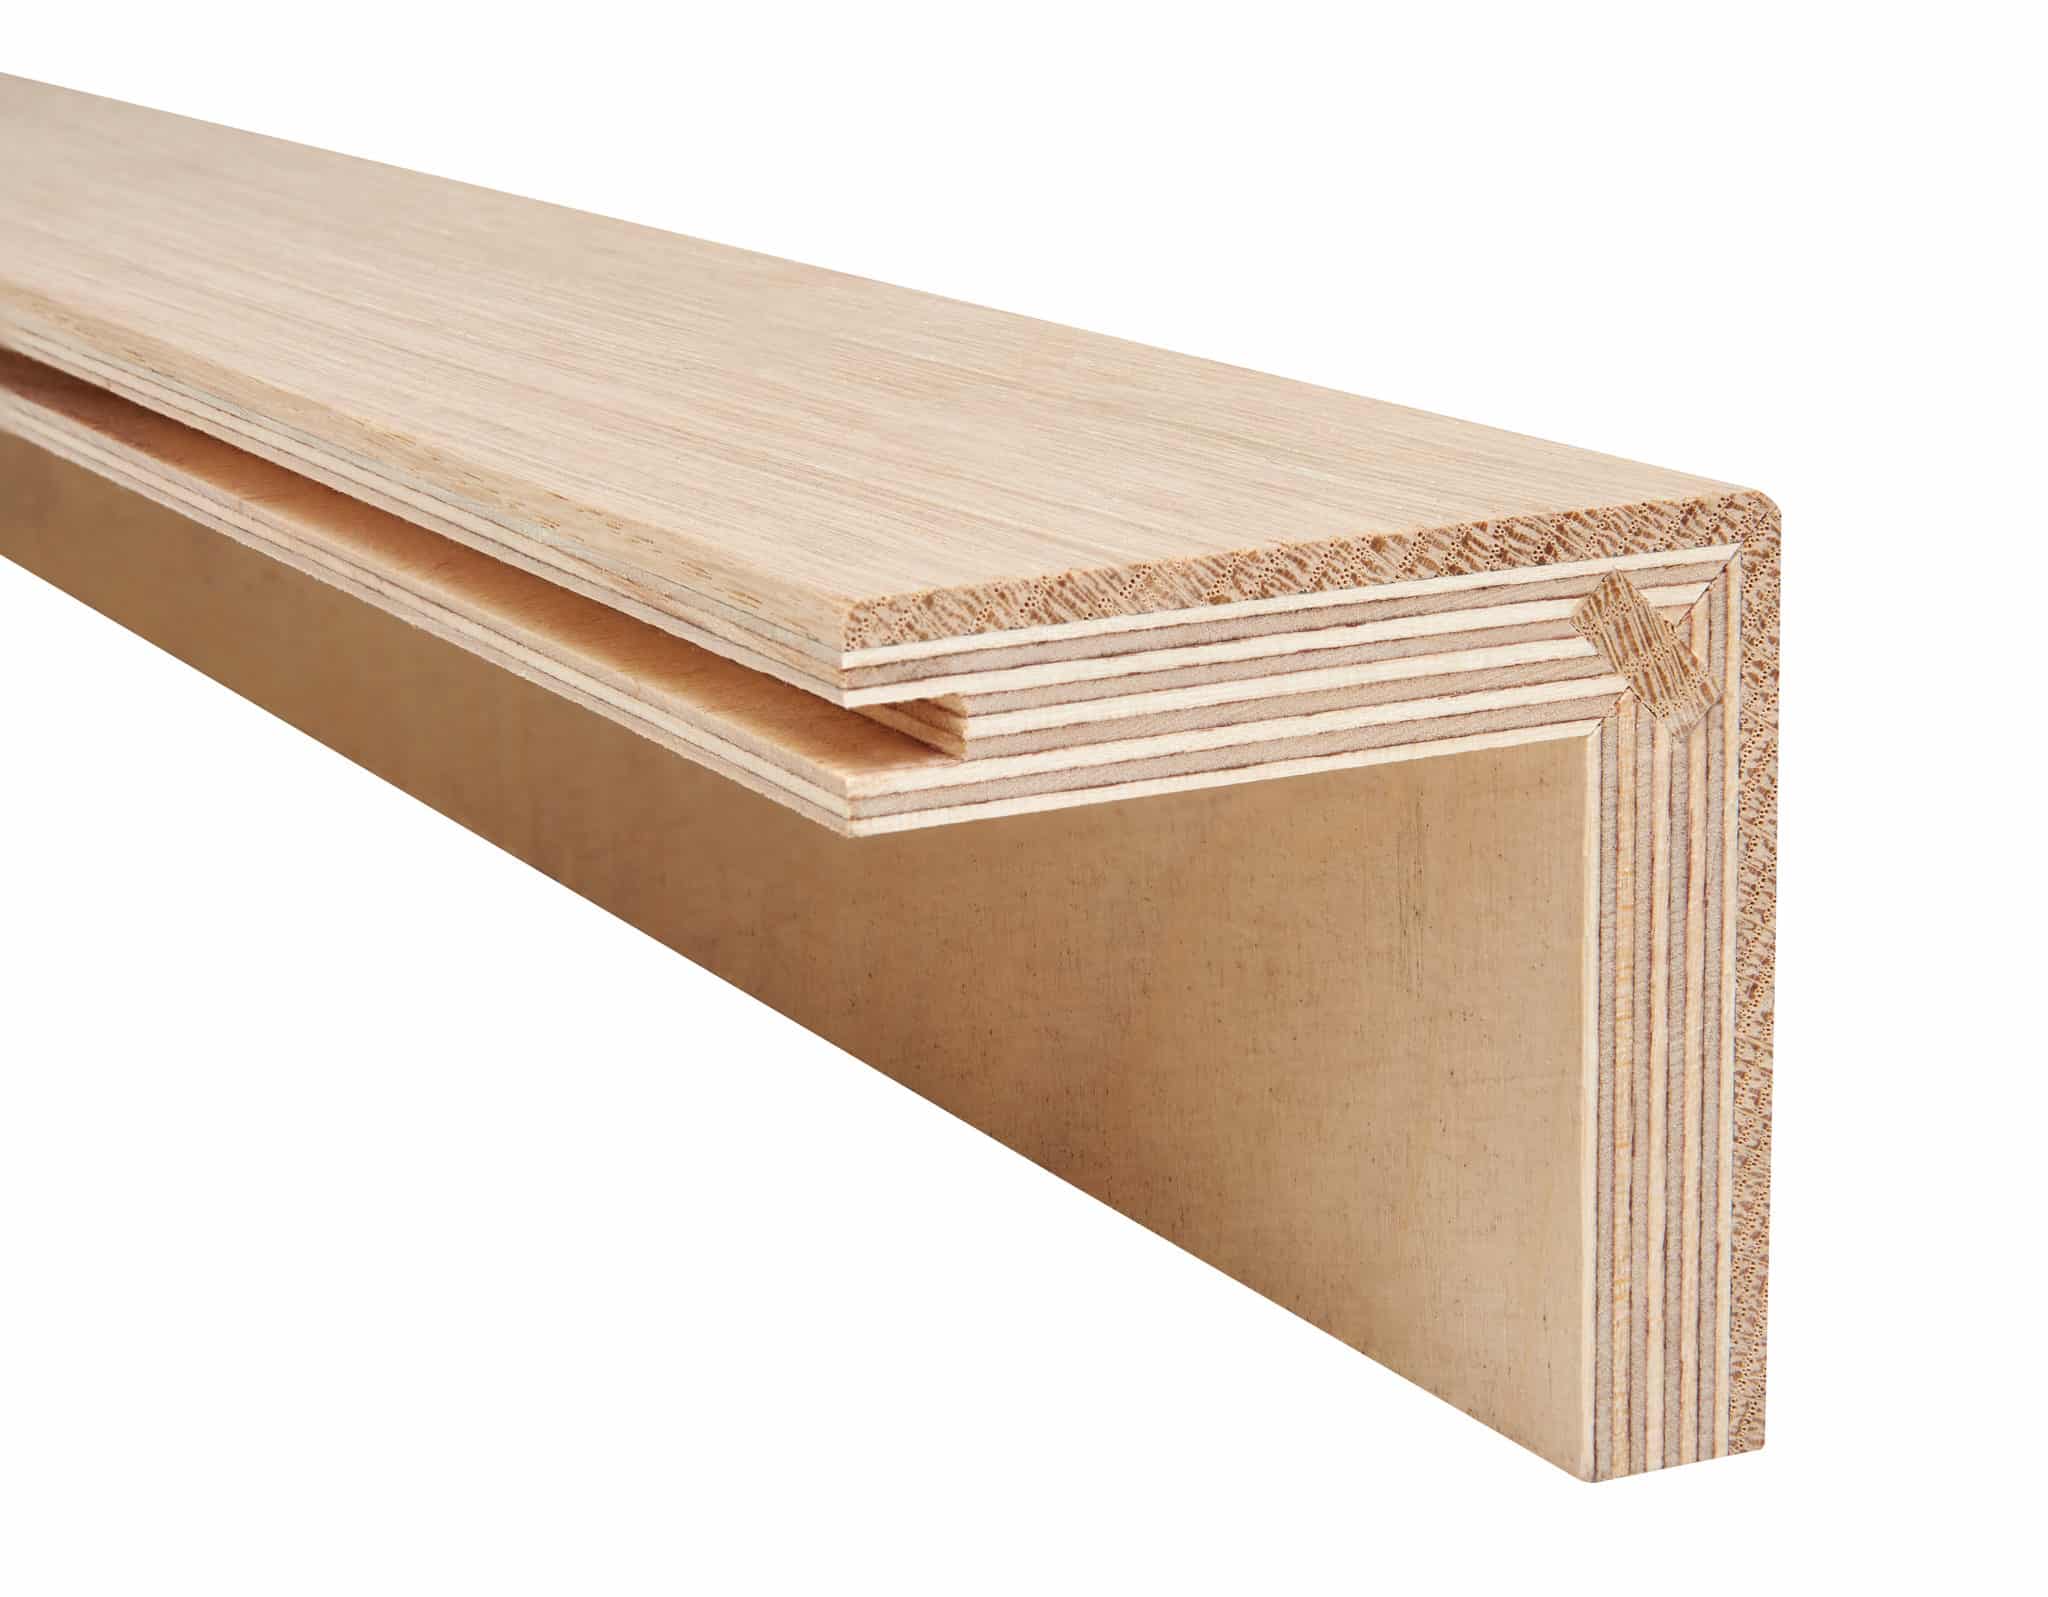 PROFIL stair nose wood stairs